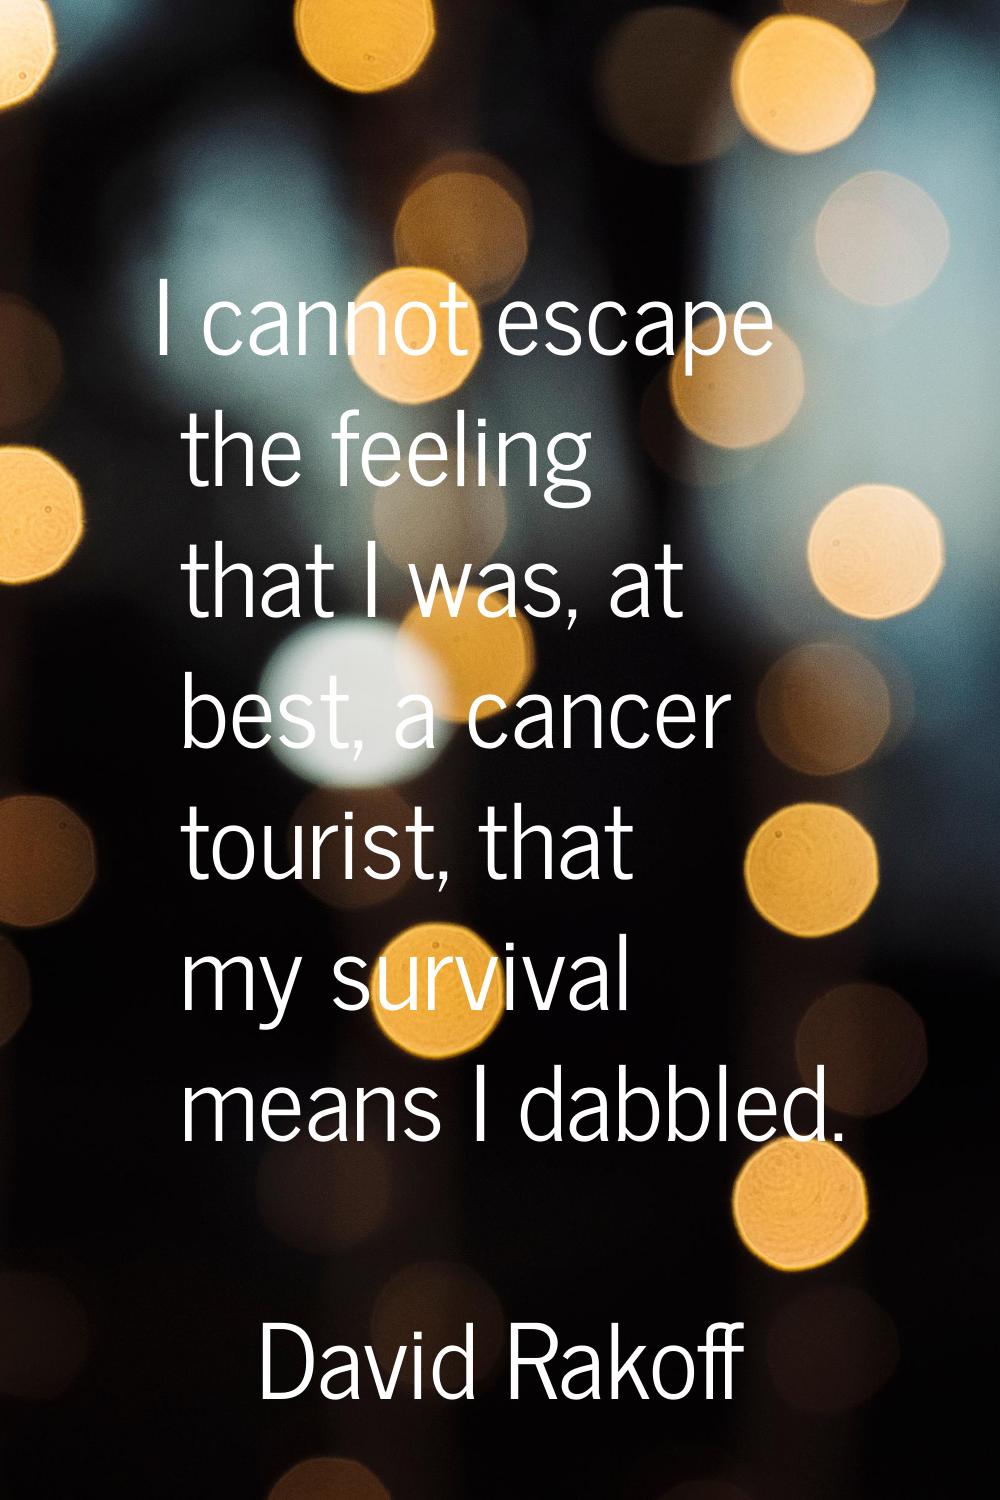 I cannot escape the feeling that I was, at best, a cancer tourist, that my survival means I dabbled